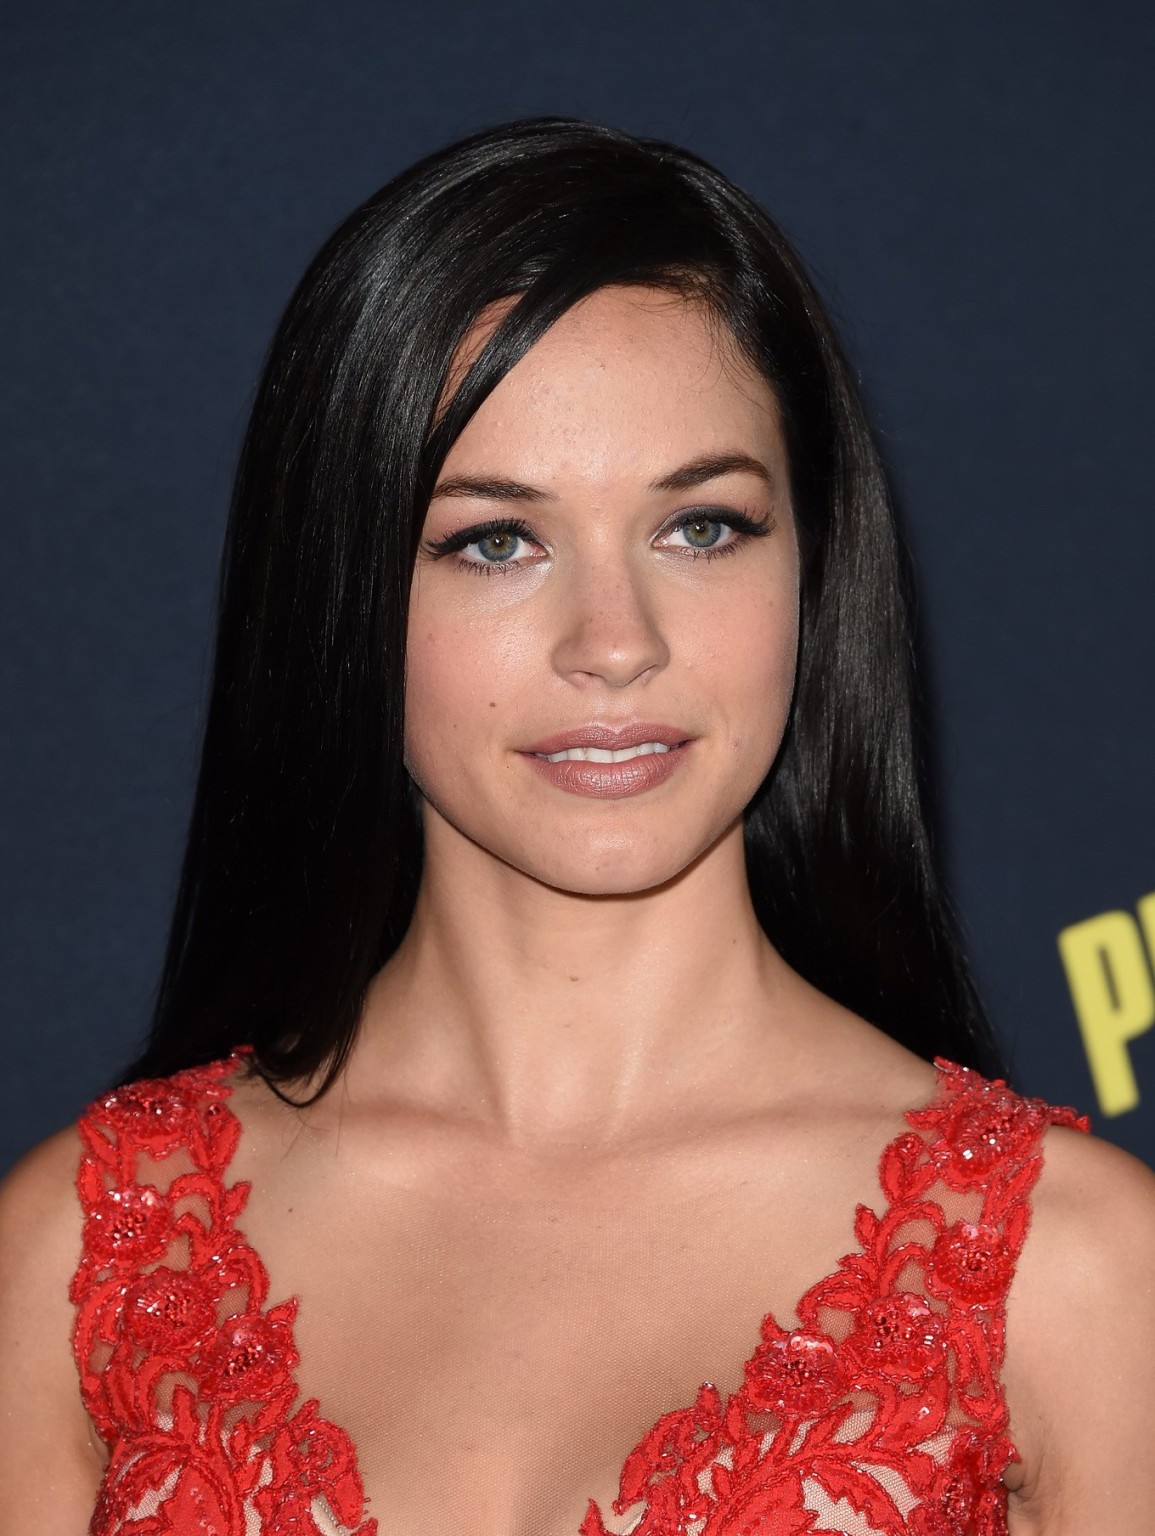 Alexis Knapp showing big cleavage in hot red dress at the Pitch Perfect 2 premie #75164662